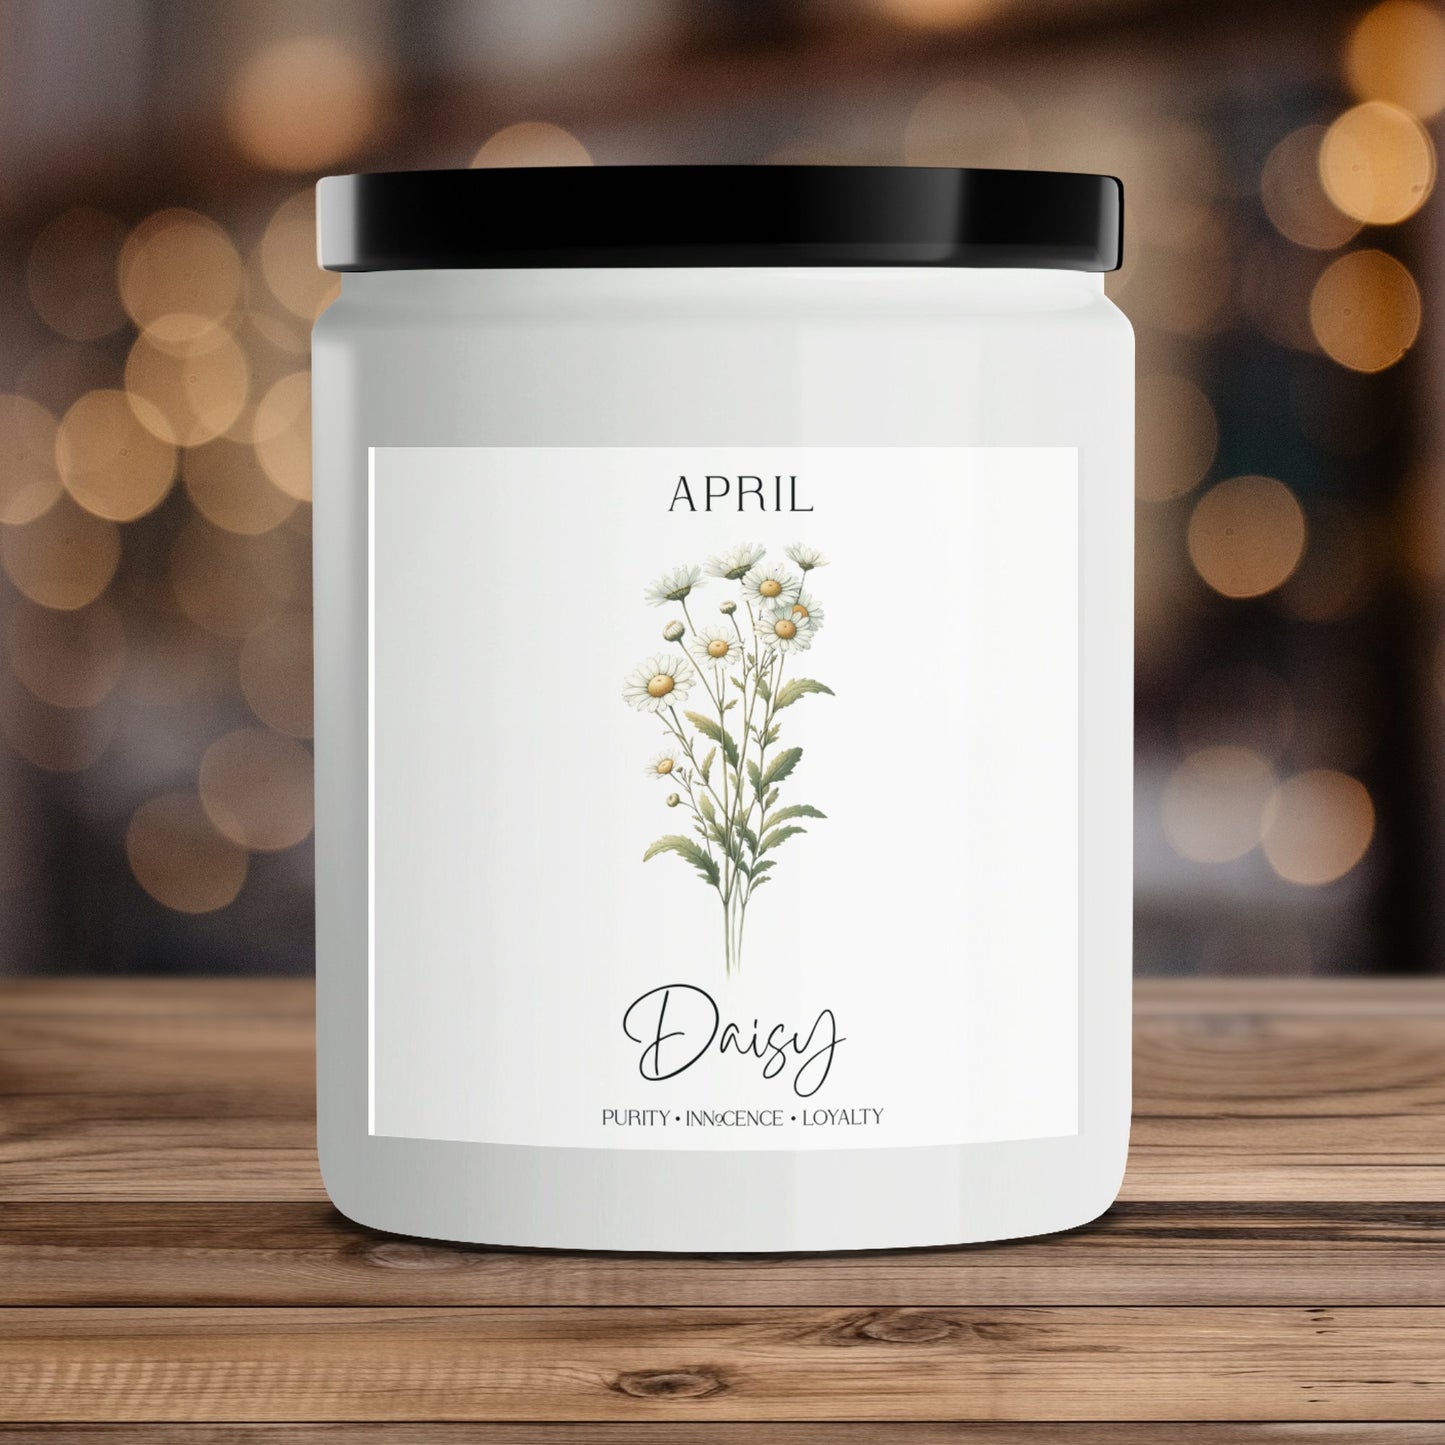 April Daisy Scented Candle, Floral Spring Aroma, Botanical Home Decor, Gift for Mother's Day - Mardonyx